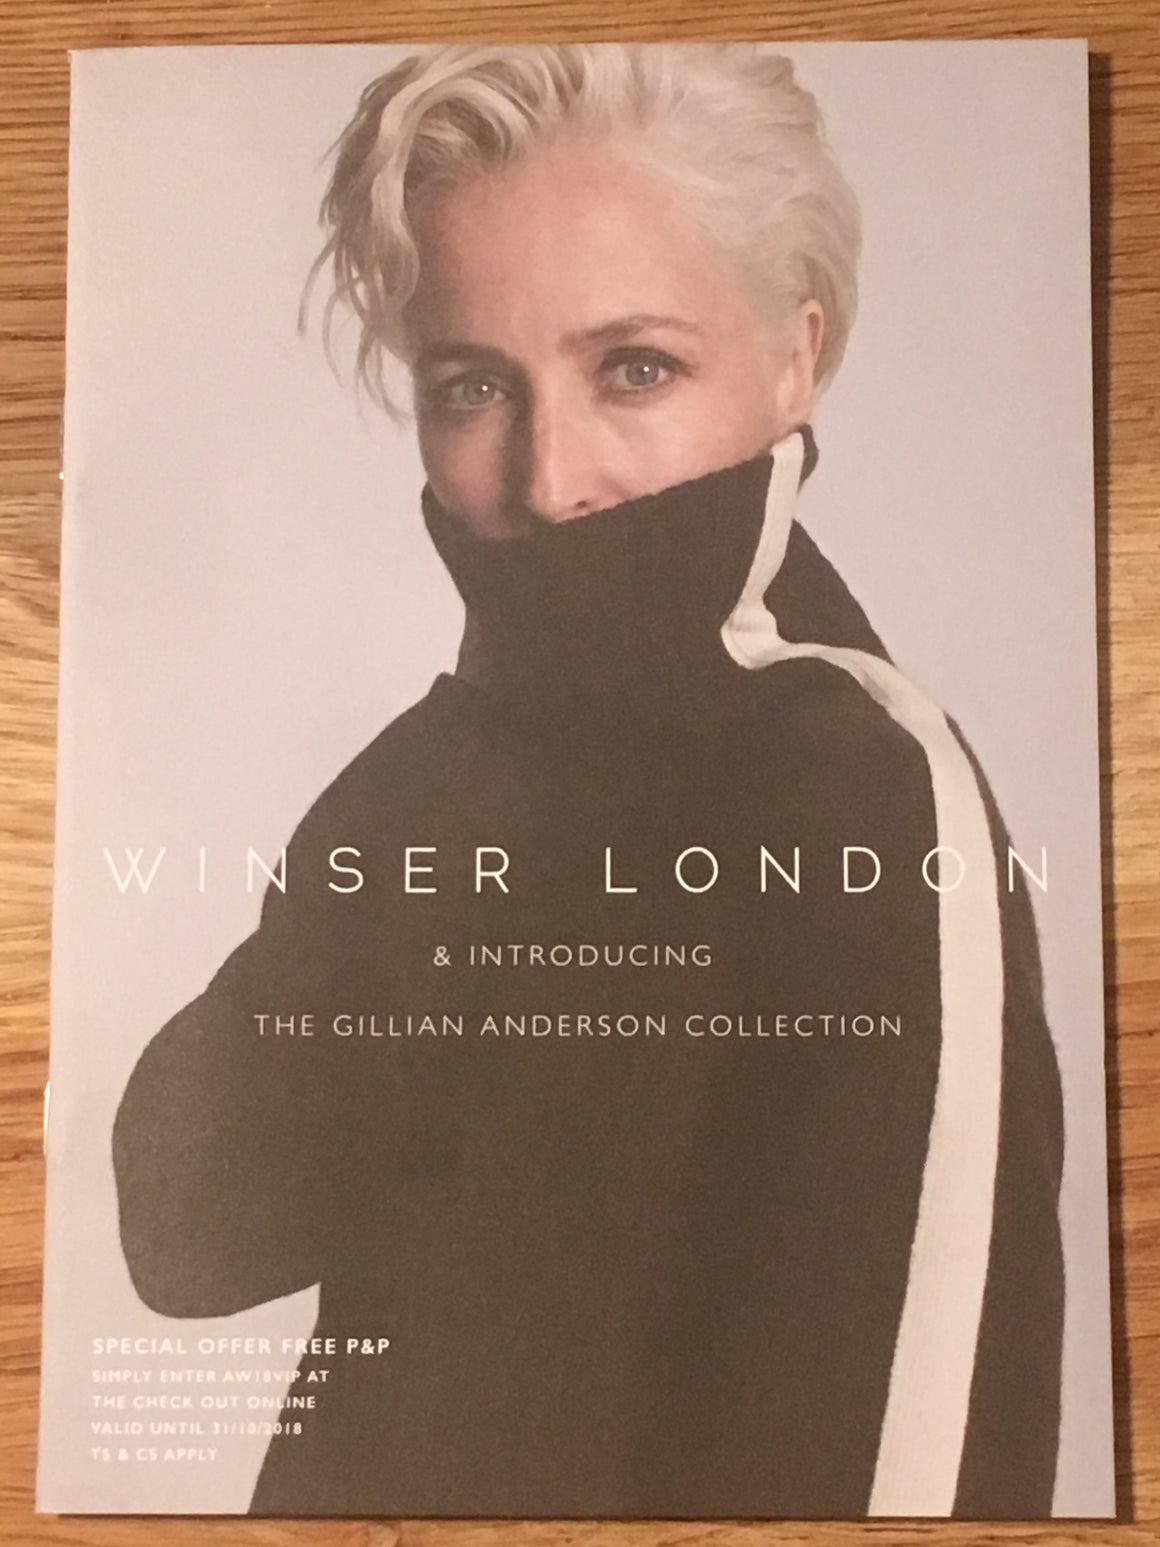 Winser London - The Gillian Anderson Collection UK Catalog 2018